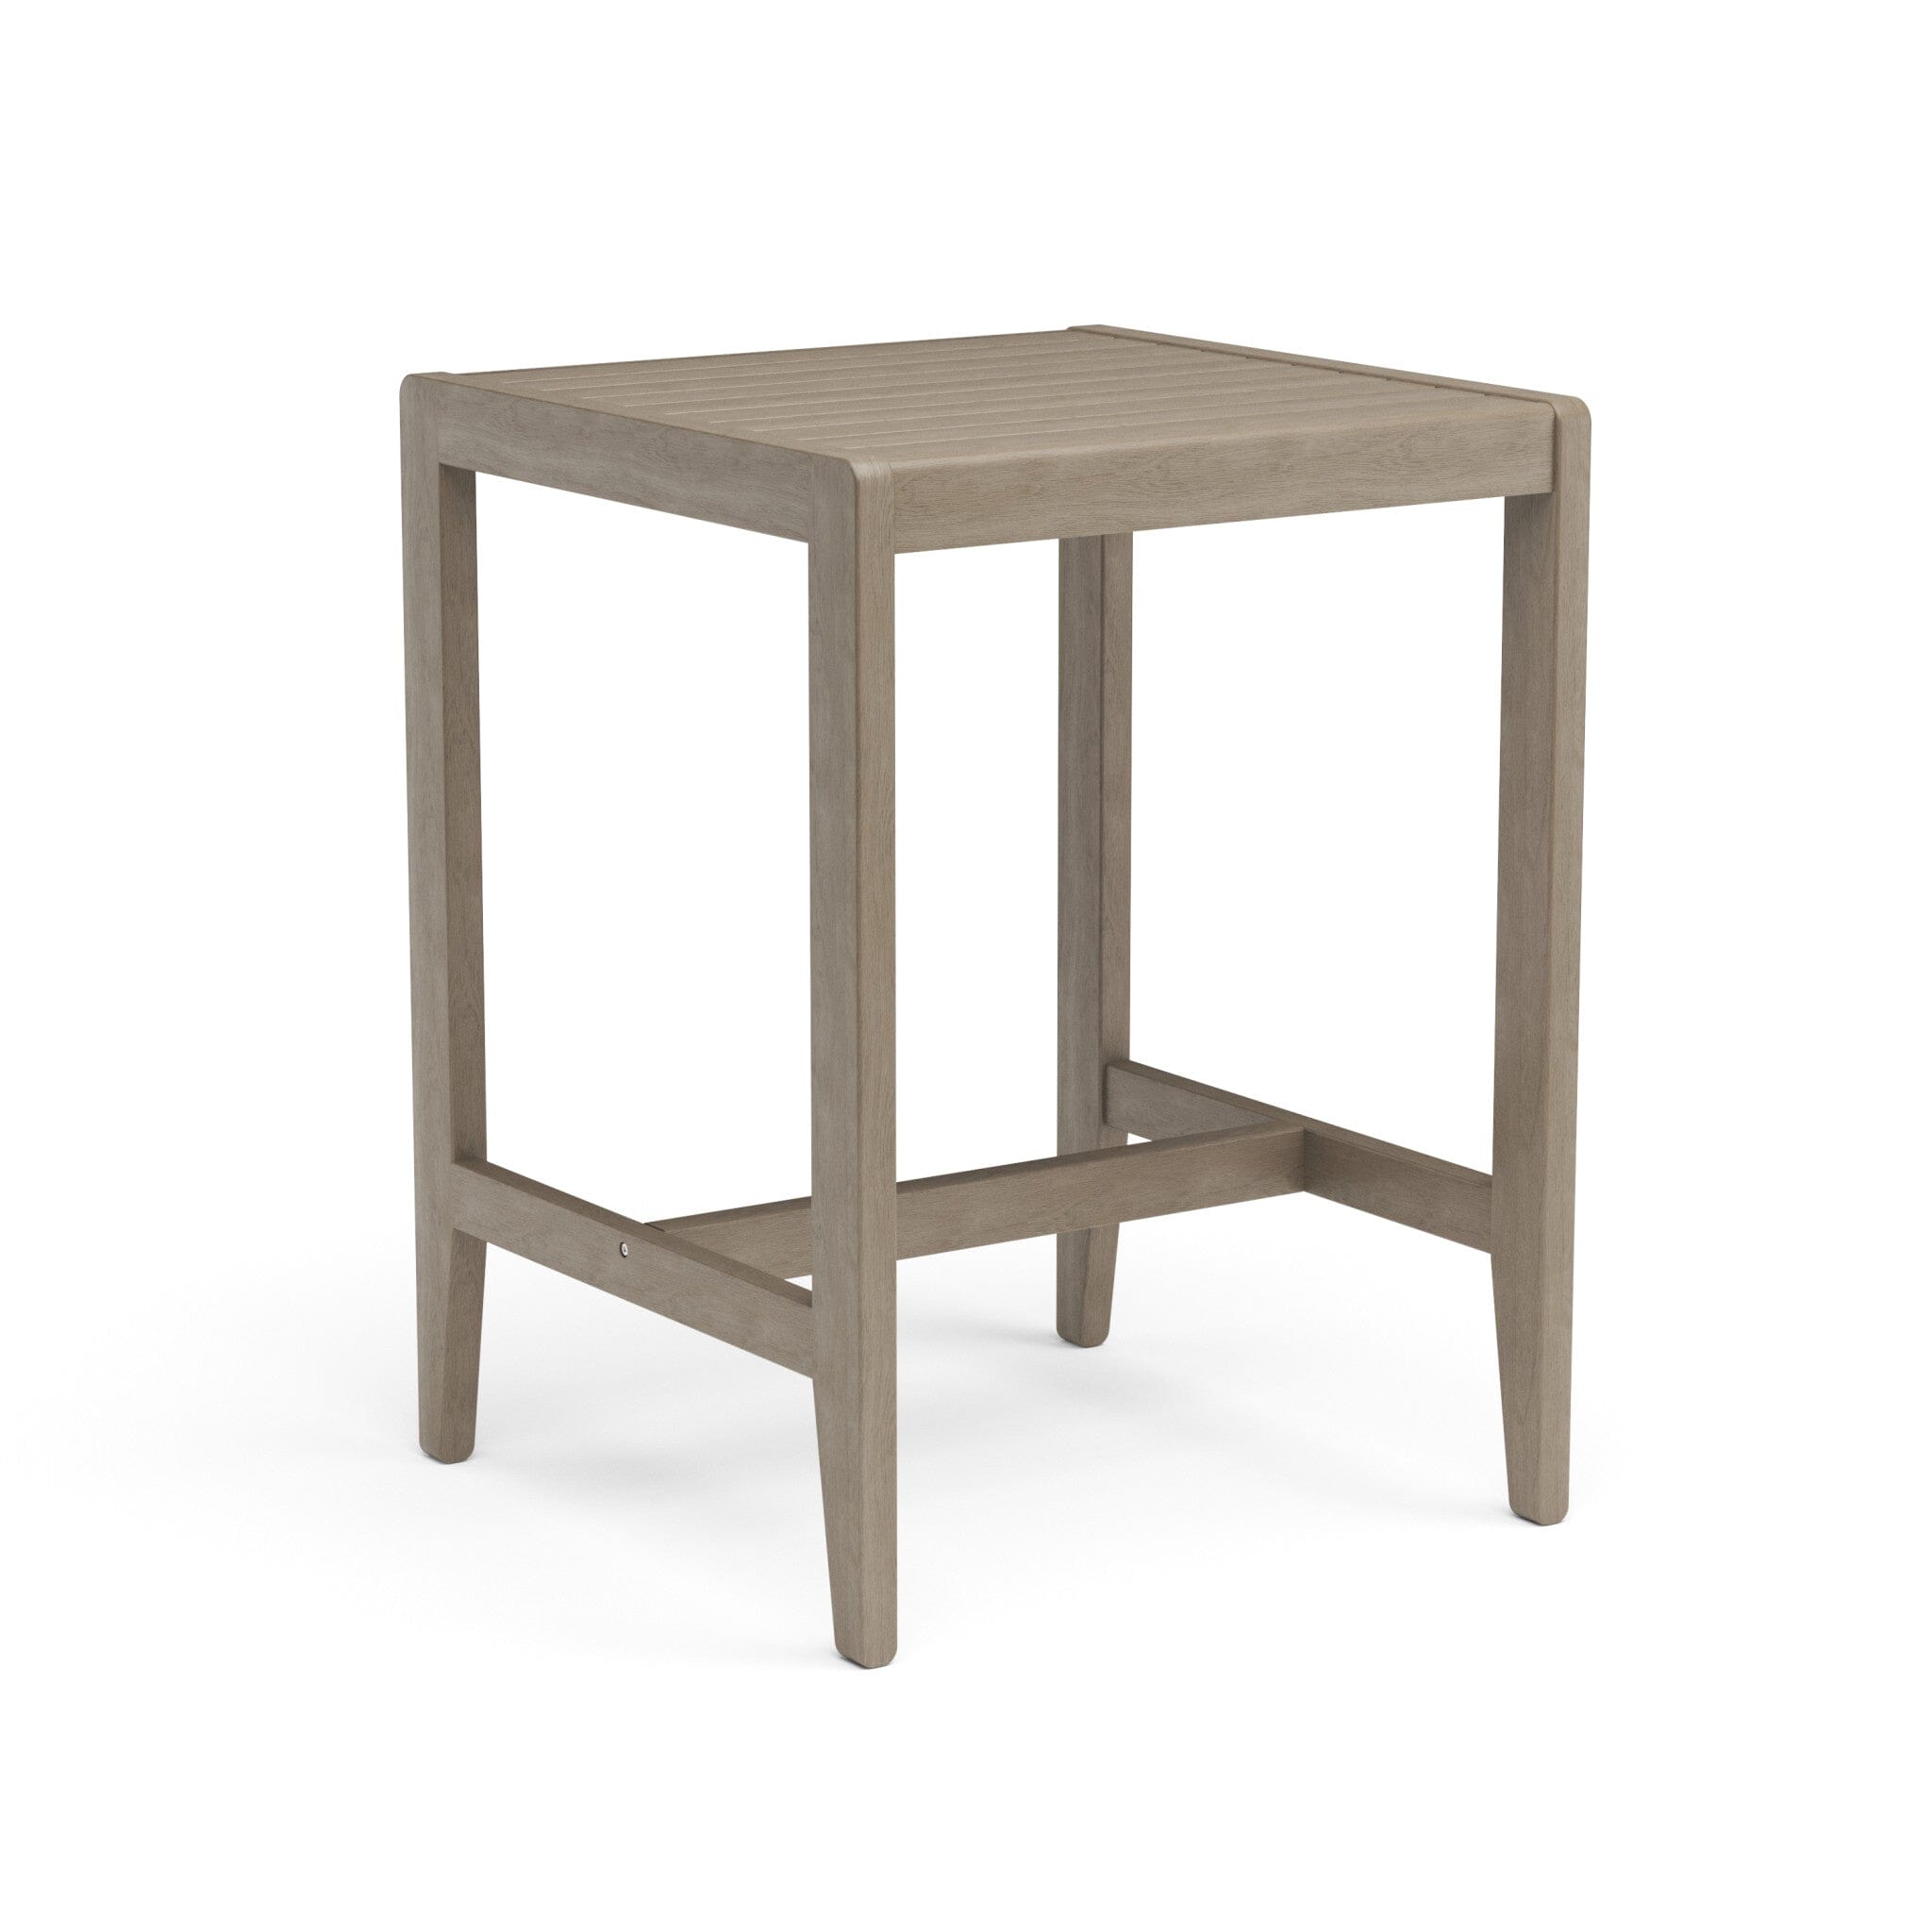 Transitional Outdoor High Bistro Table By Sustain Outdoor Dining Table Sustain